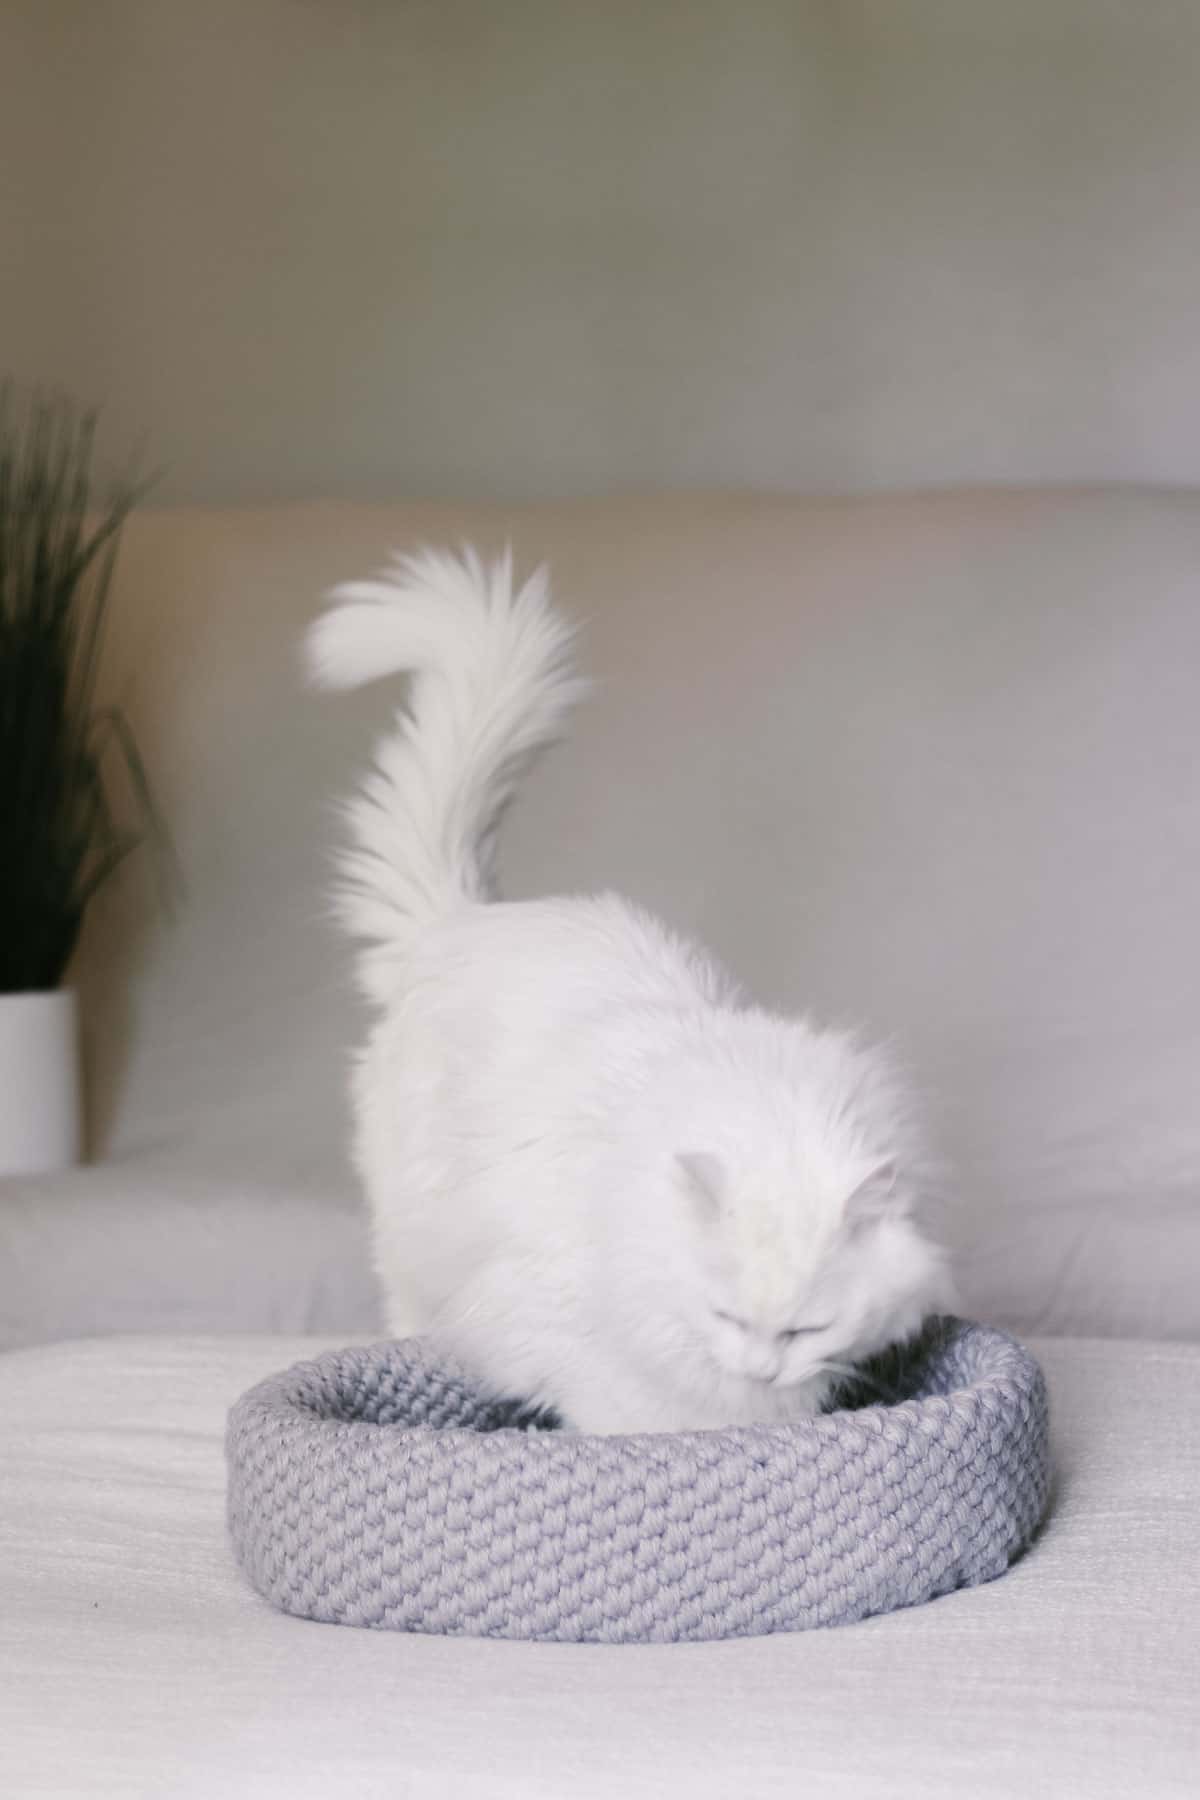 Grey crocheted pet bed with a white furry cat.